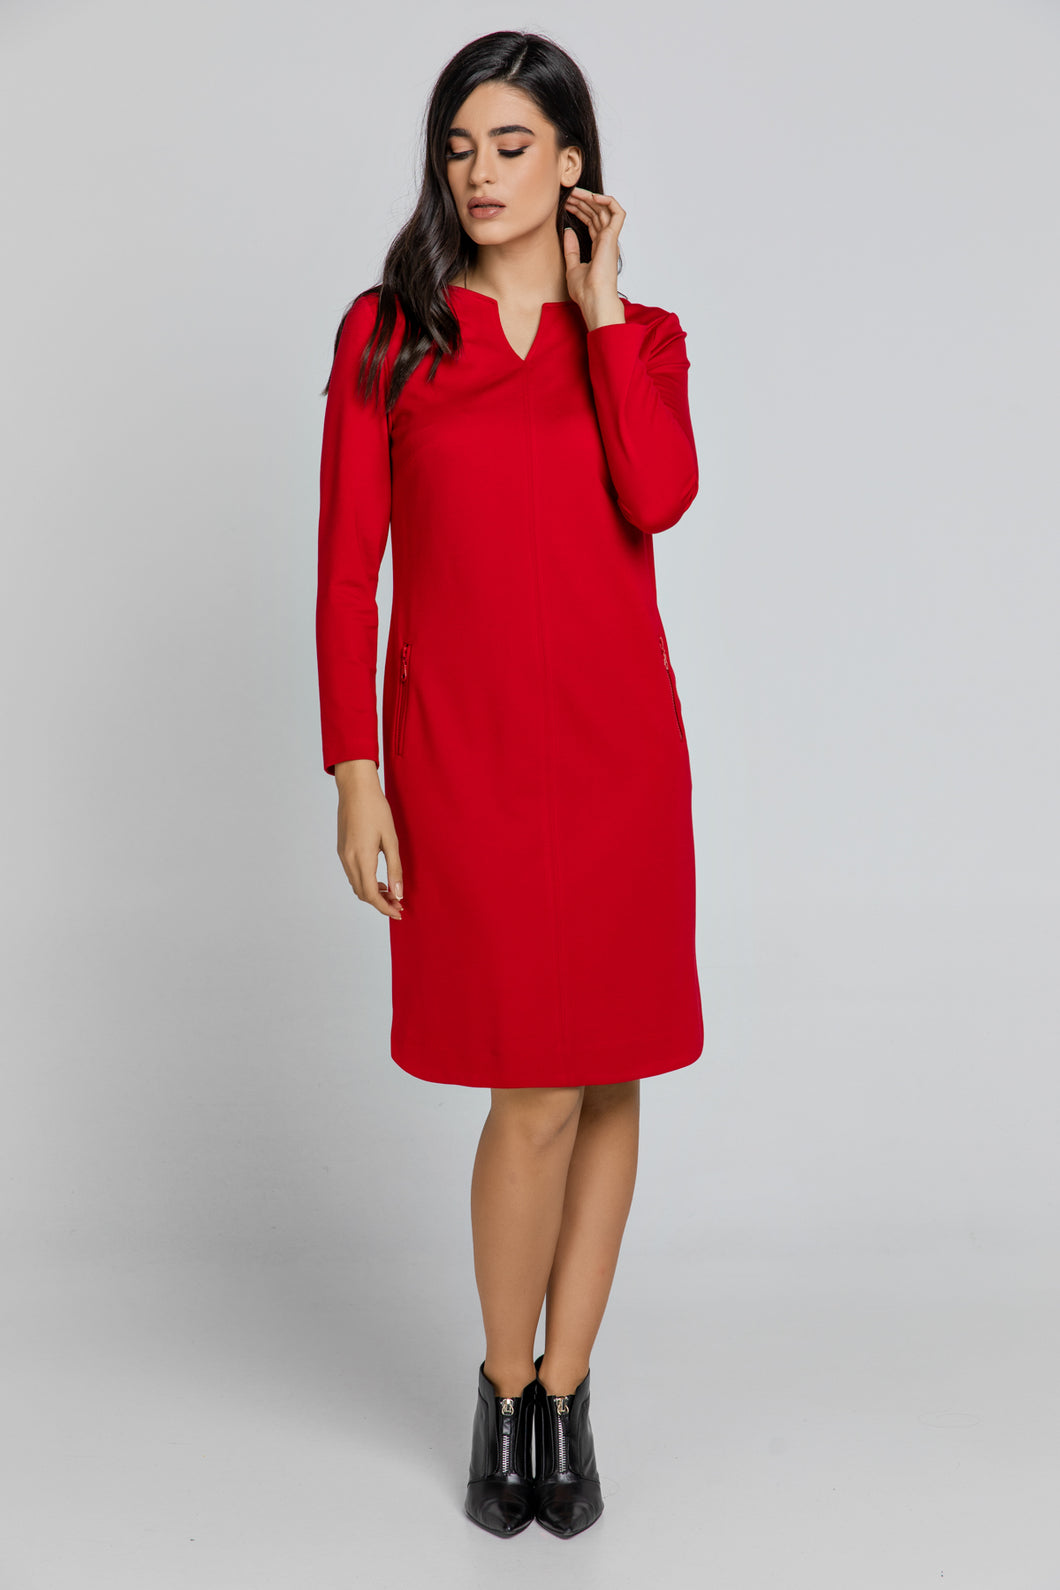 Red Sack Dress by Conquista